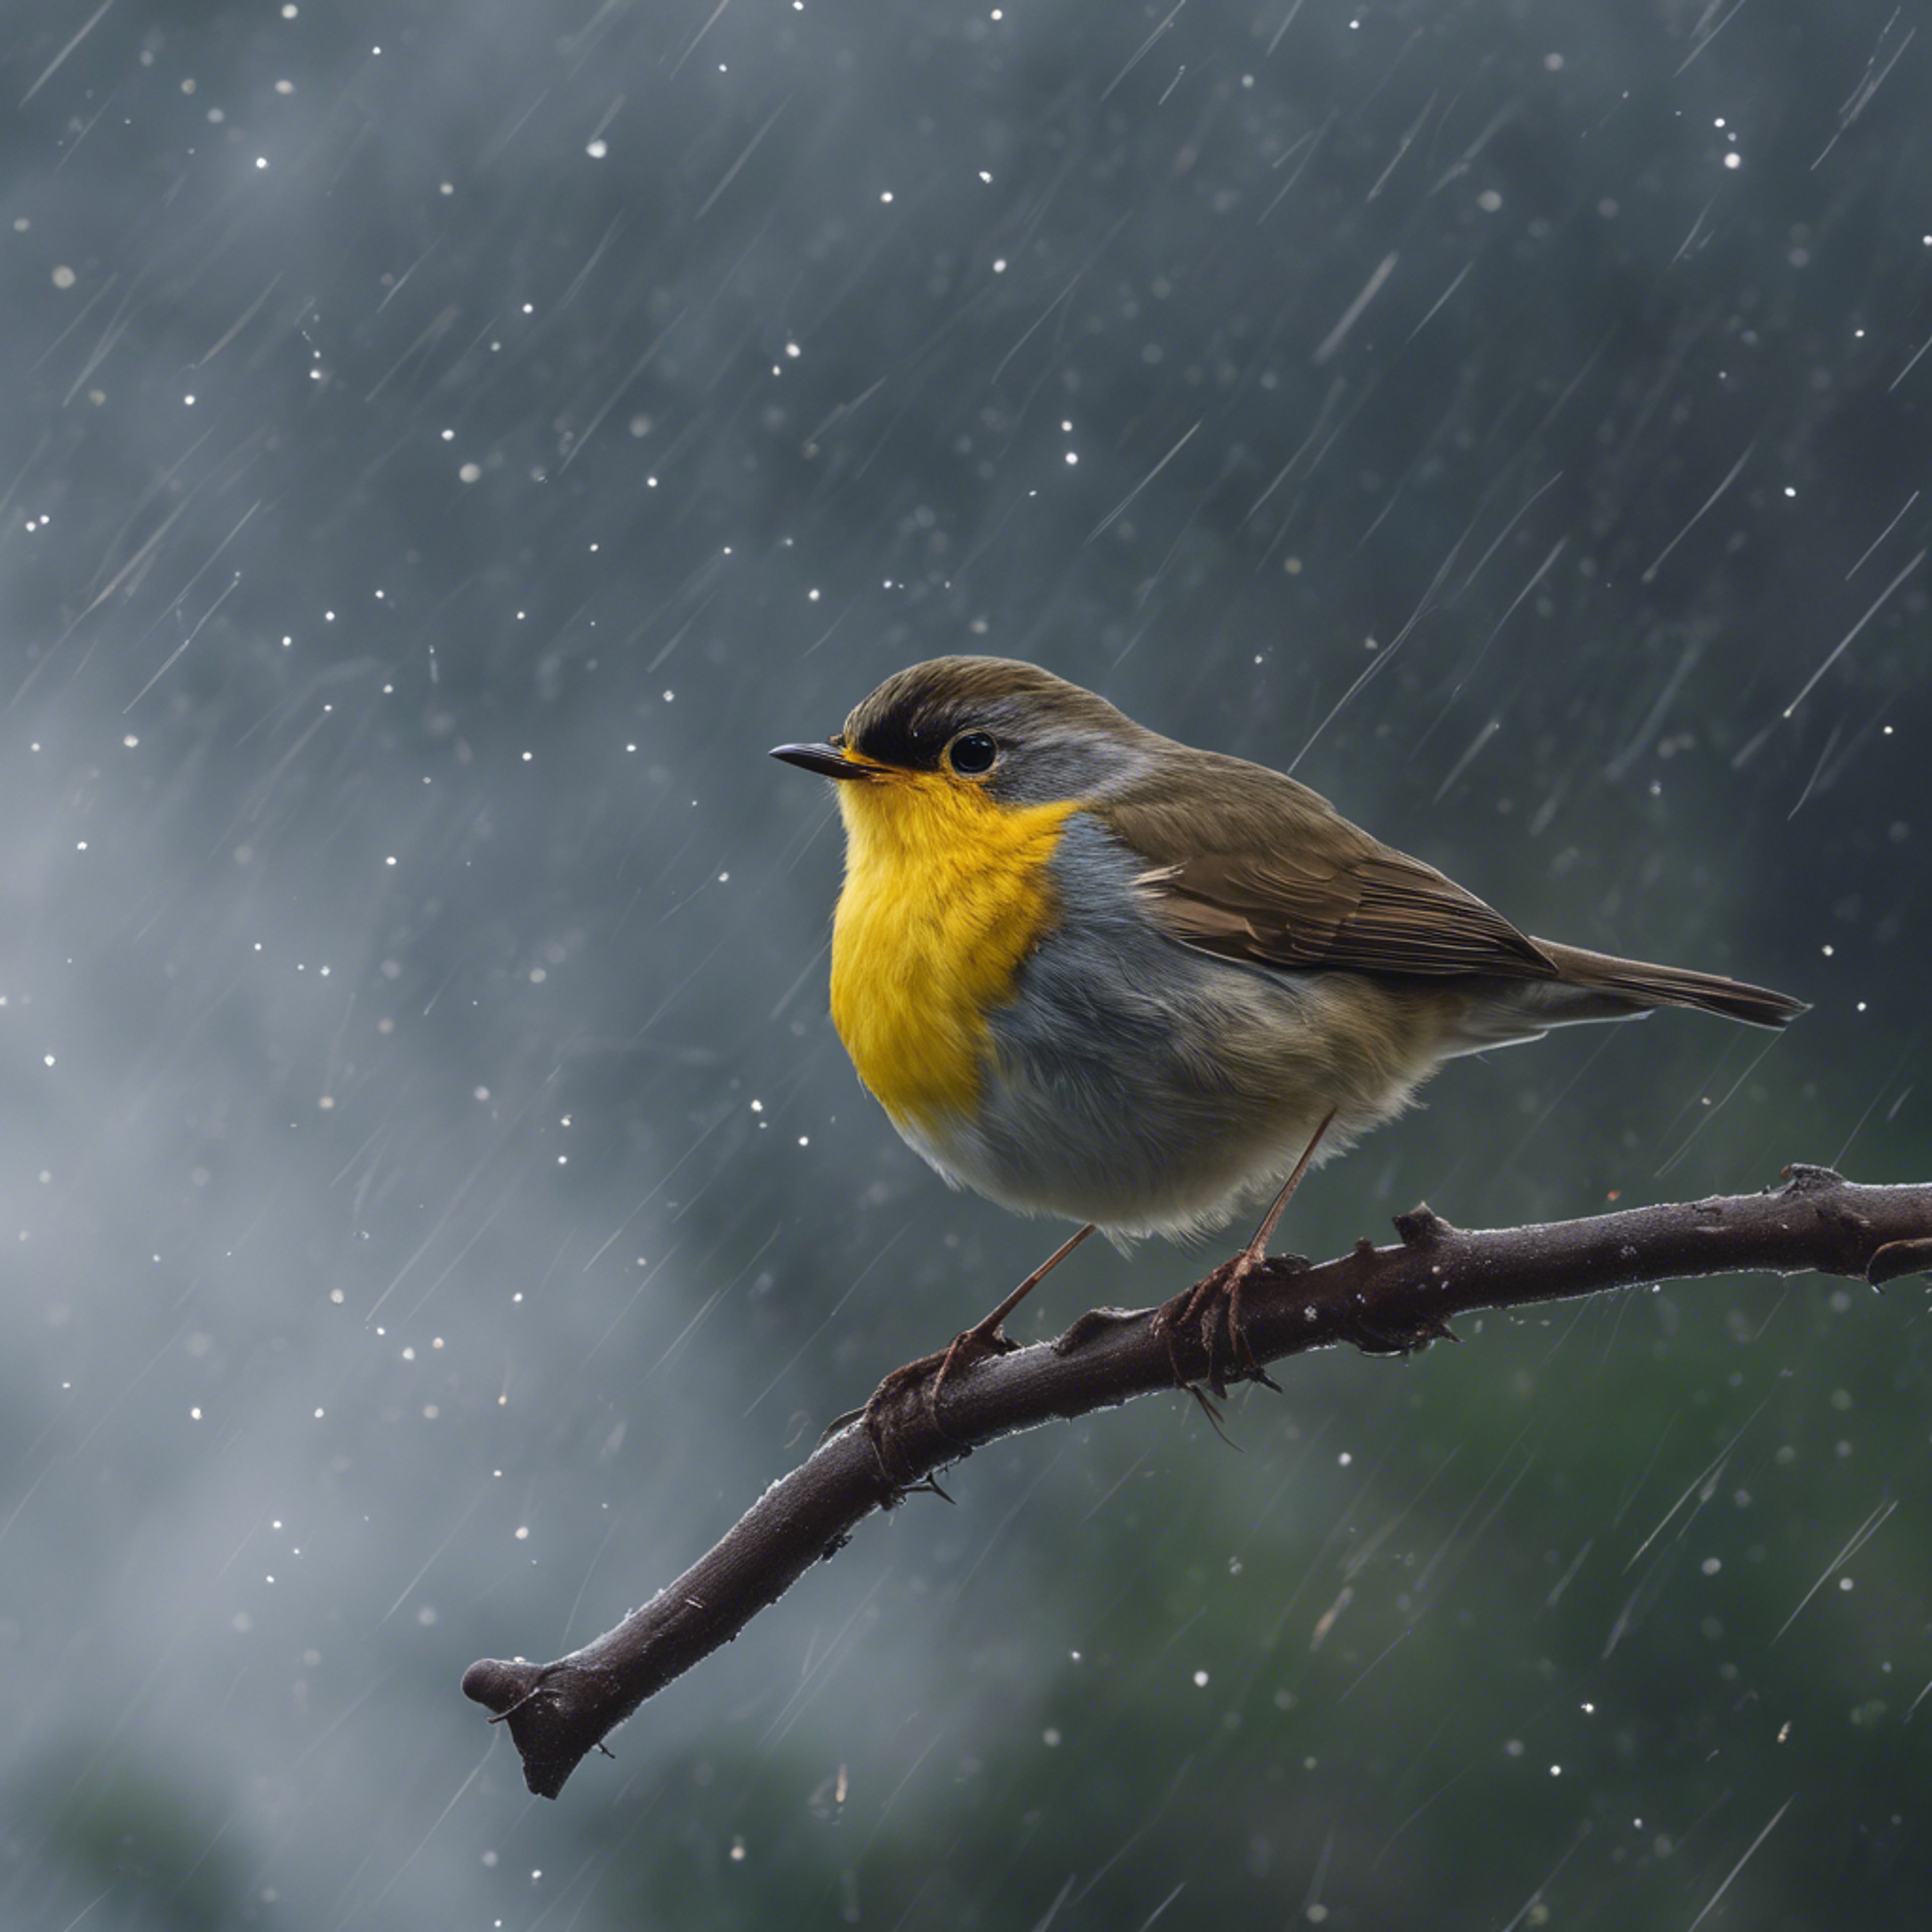 A yellow-breasted robin in mid-flight against a dark, stormy sky.壁紙[14716aee78274faeac04]